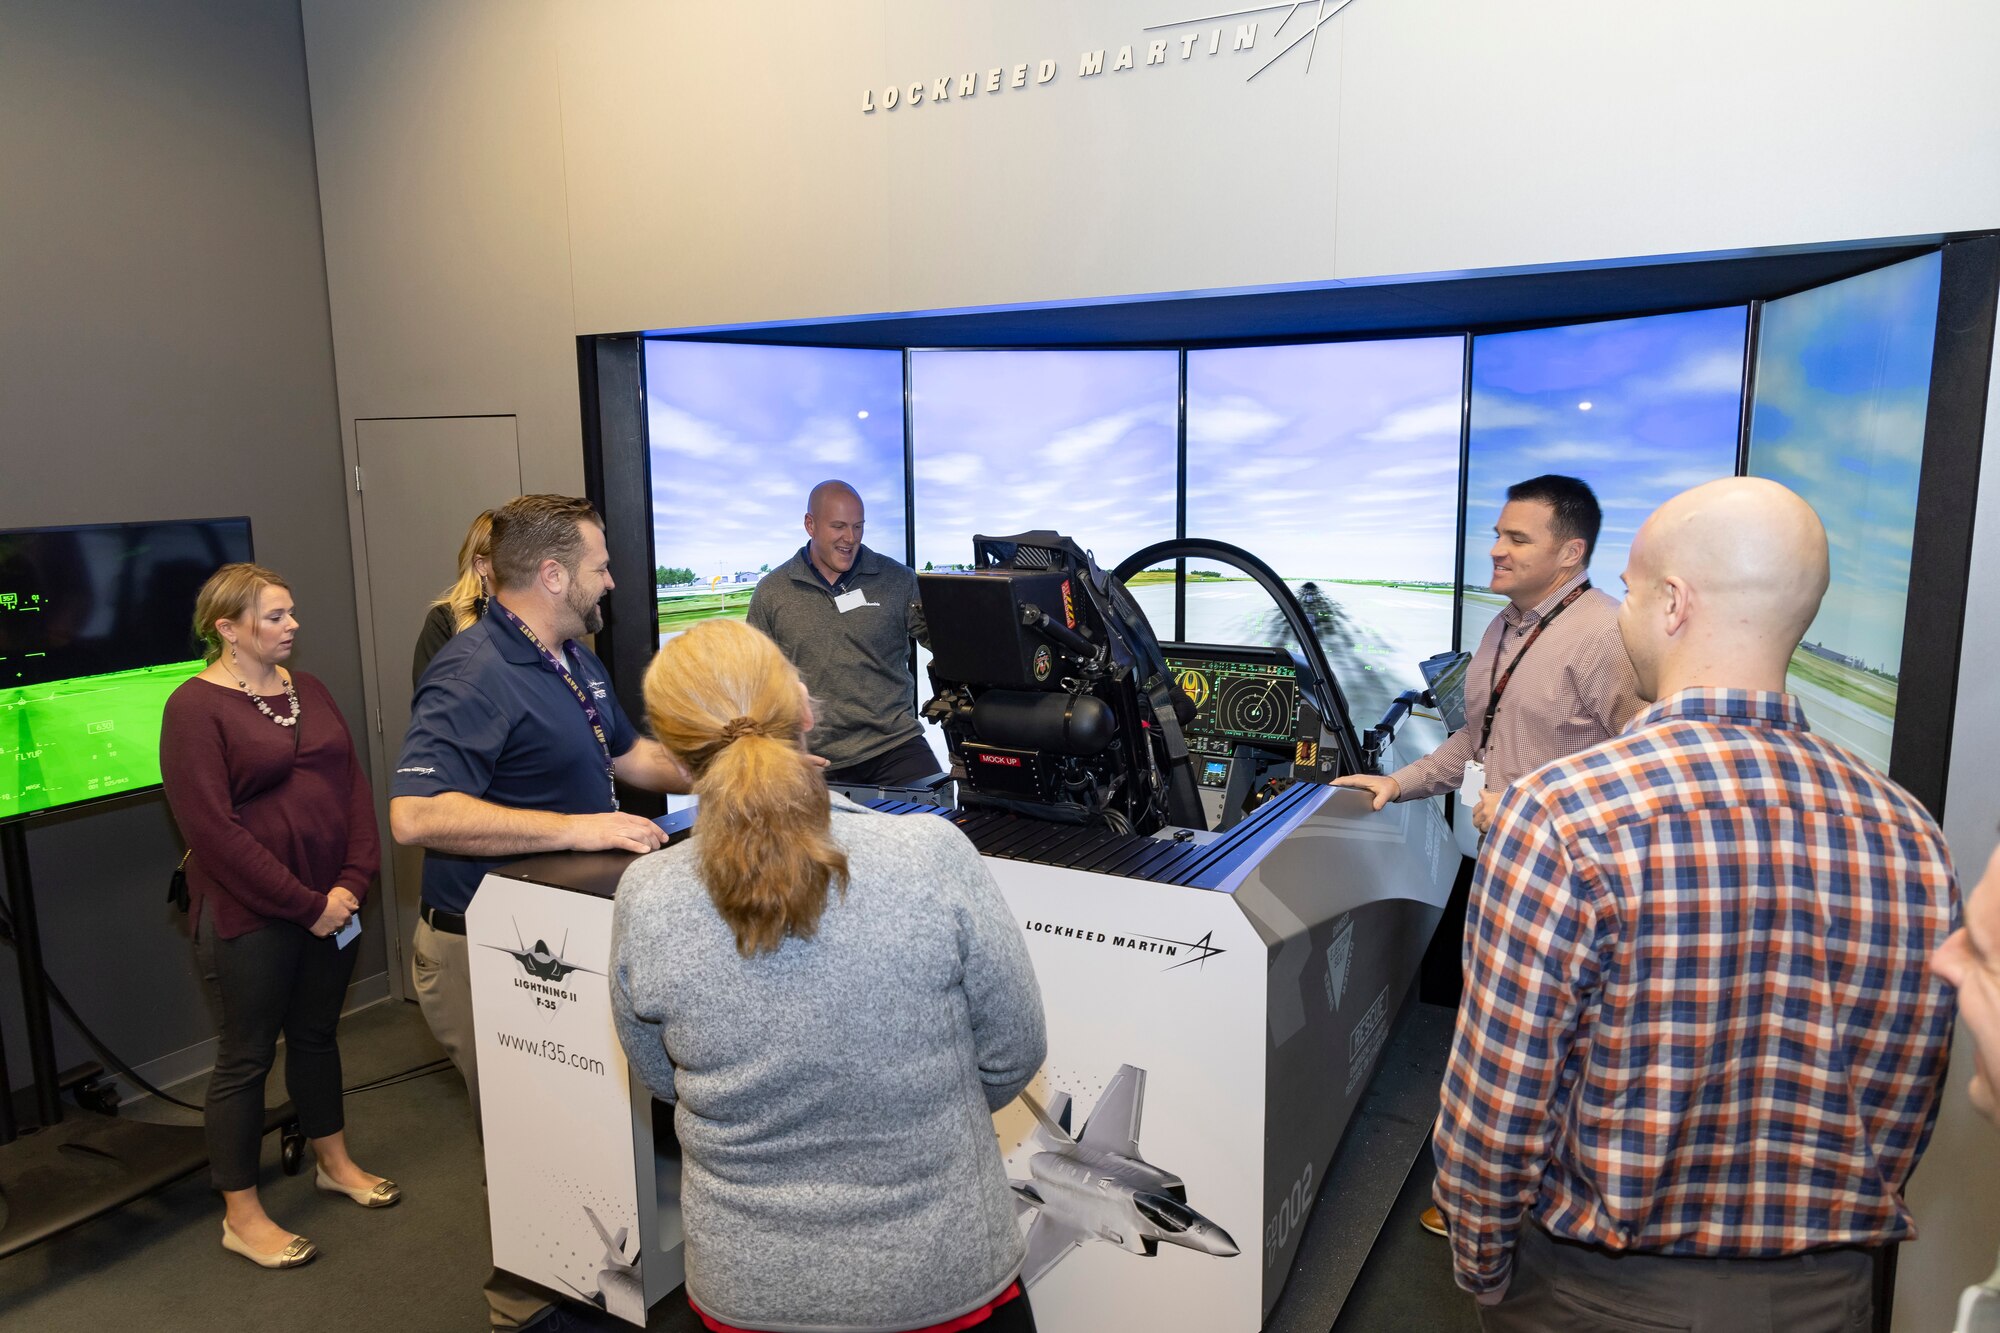 Members learn about the capabilities of an F-35 Aircraft during a visit at Lockheed Martin